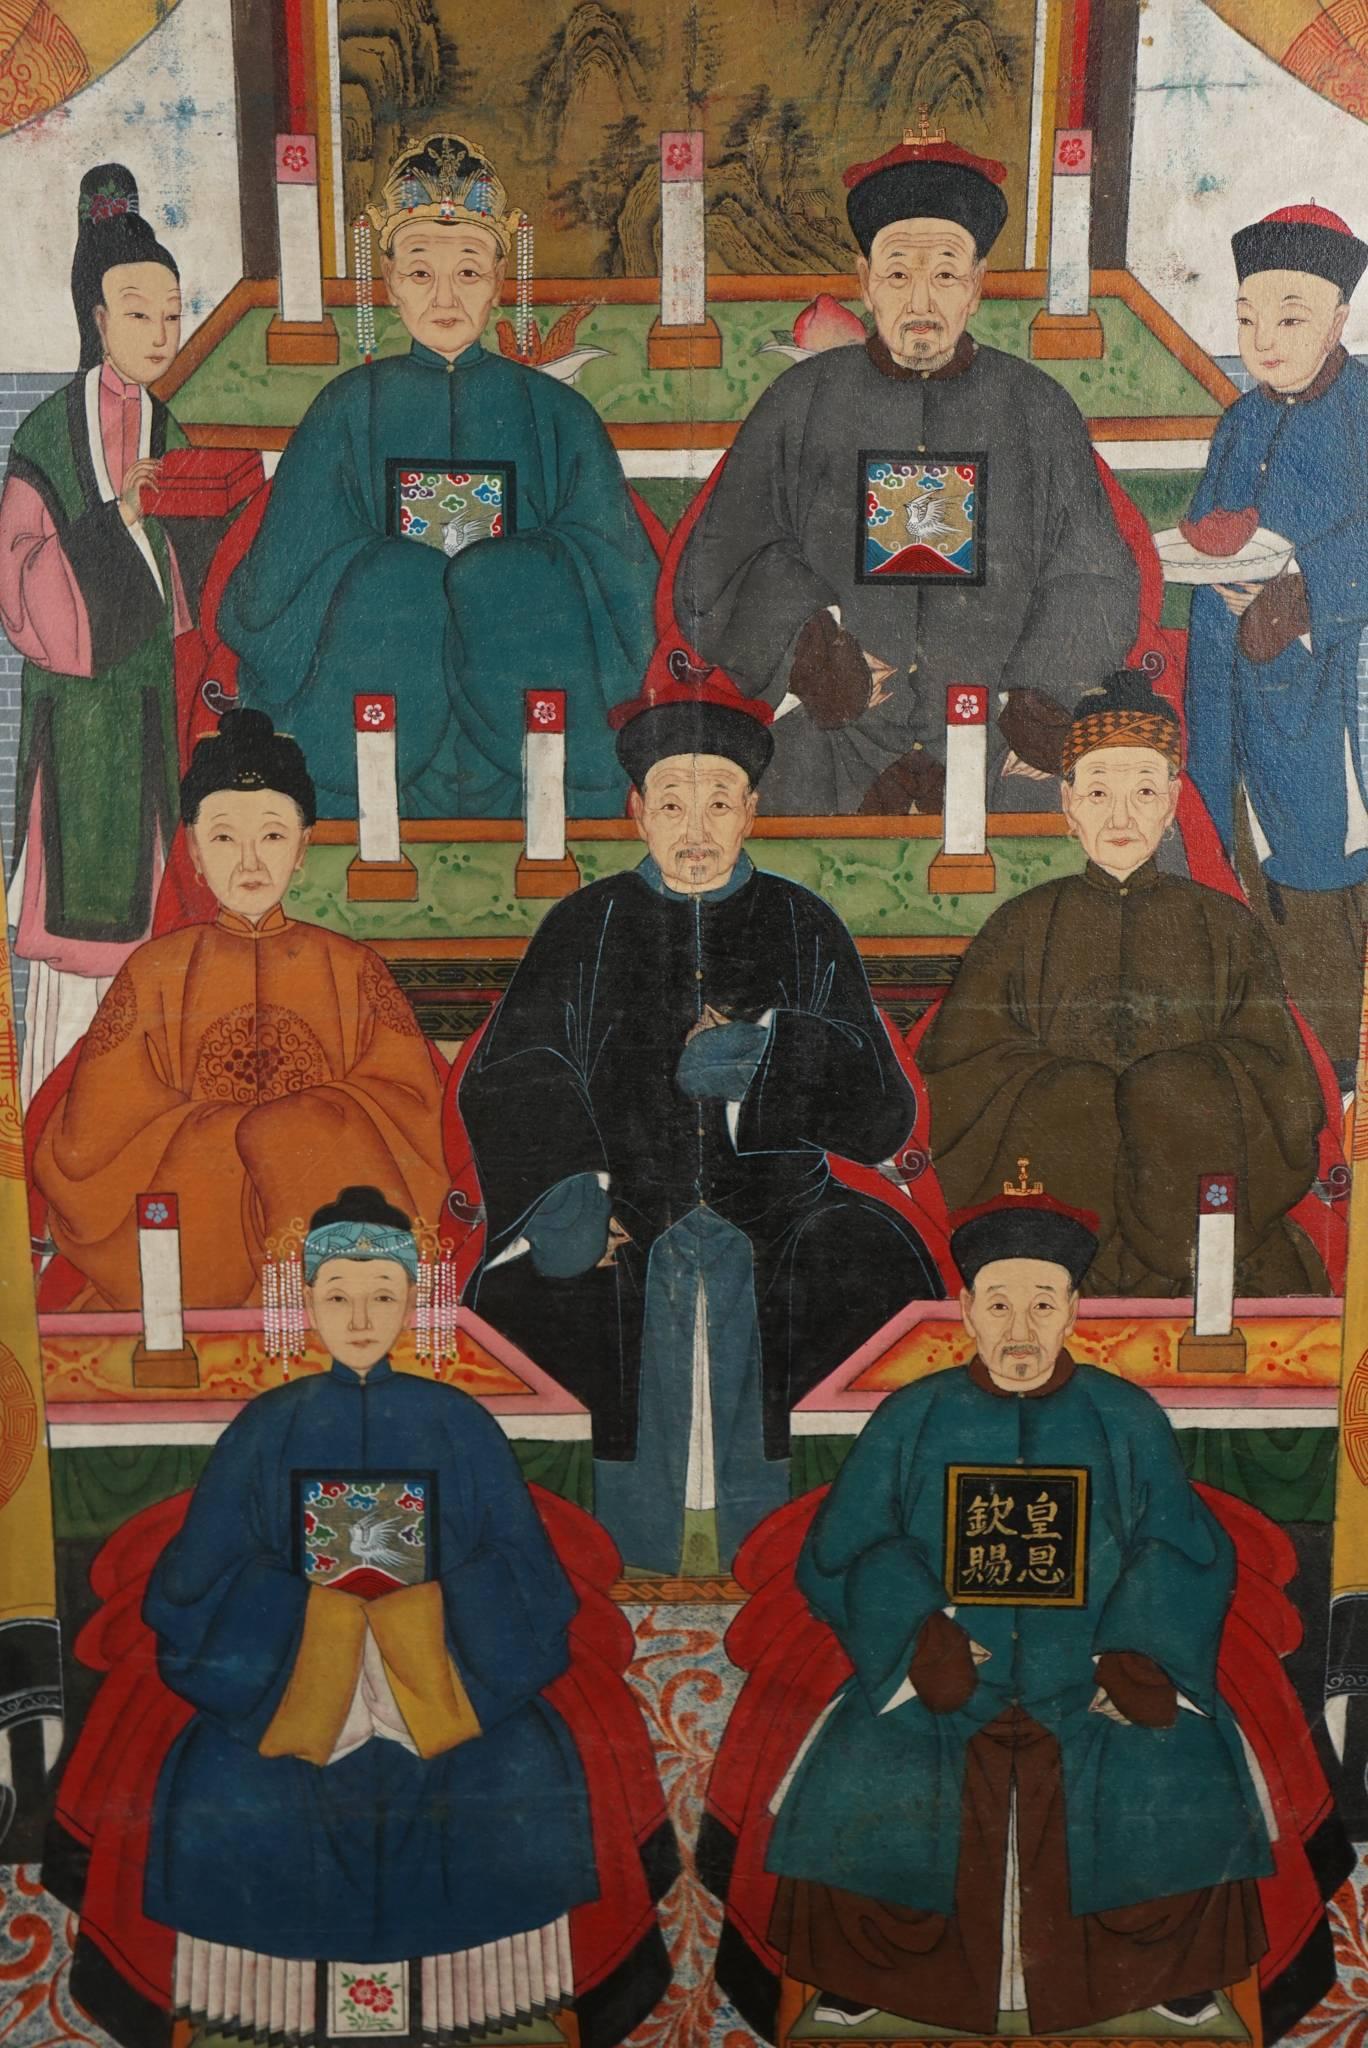 This work unusual for being done in oil on canvas is from the late period of the Manchu Rule and may in fact be more about a desire for the glory days of Chinese imperial rule then a specific family portrait completed of living members of a clan.